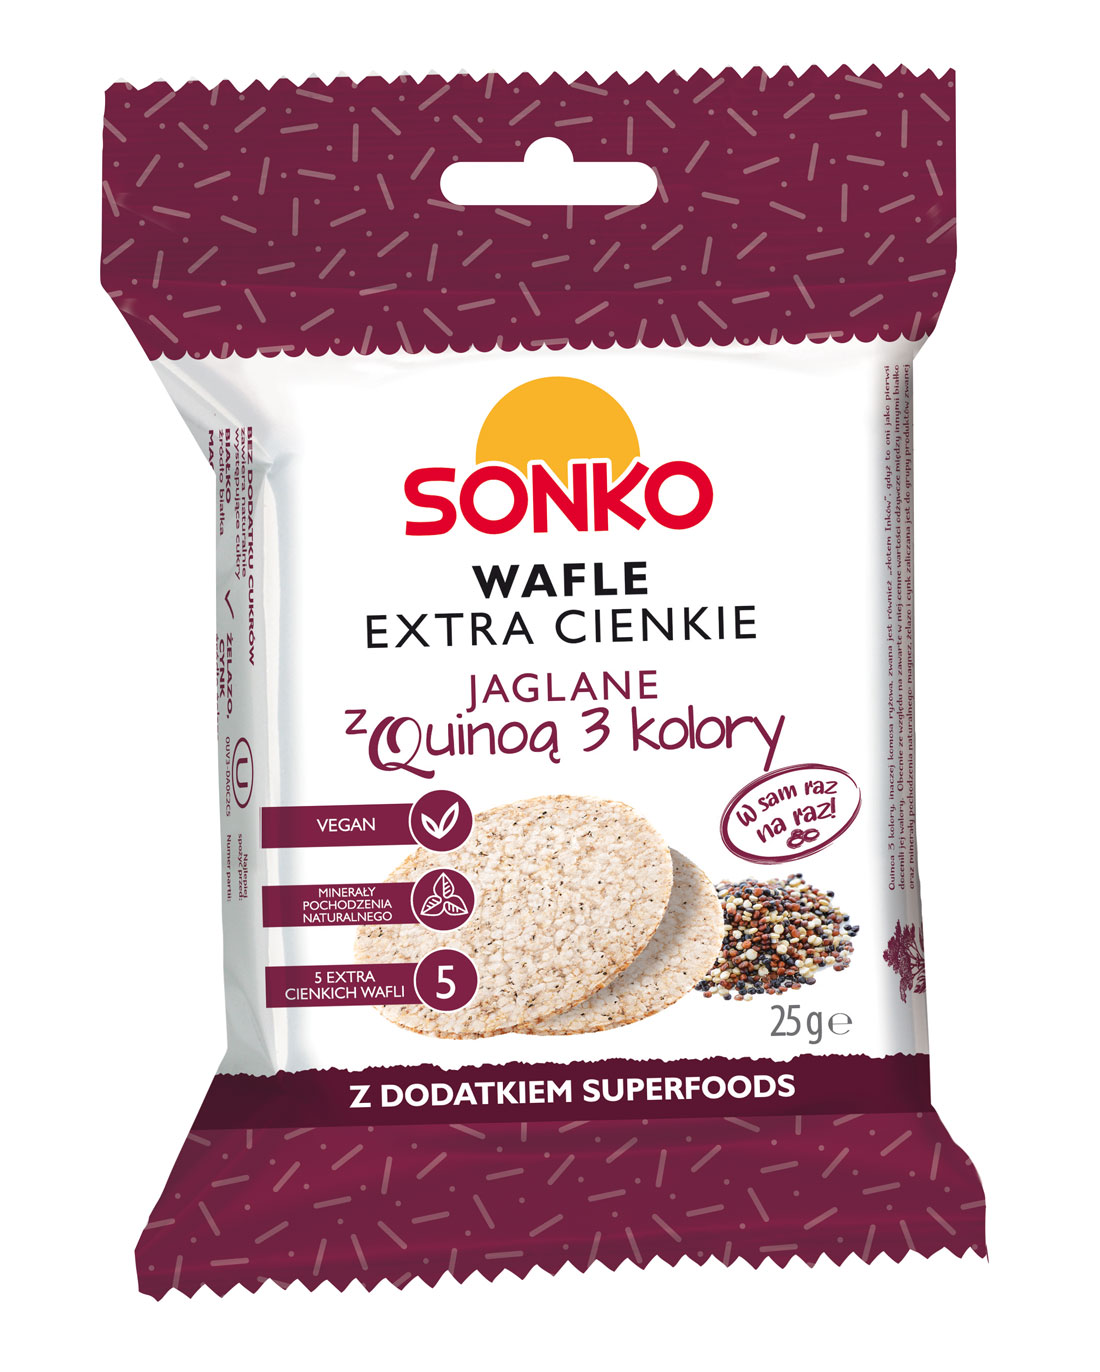 Sonko Extra thin Wafers Millet with Quinoa 3 colors